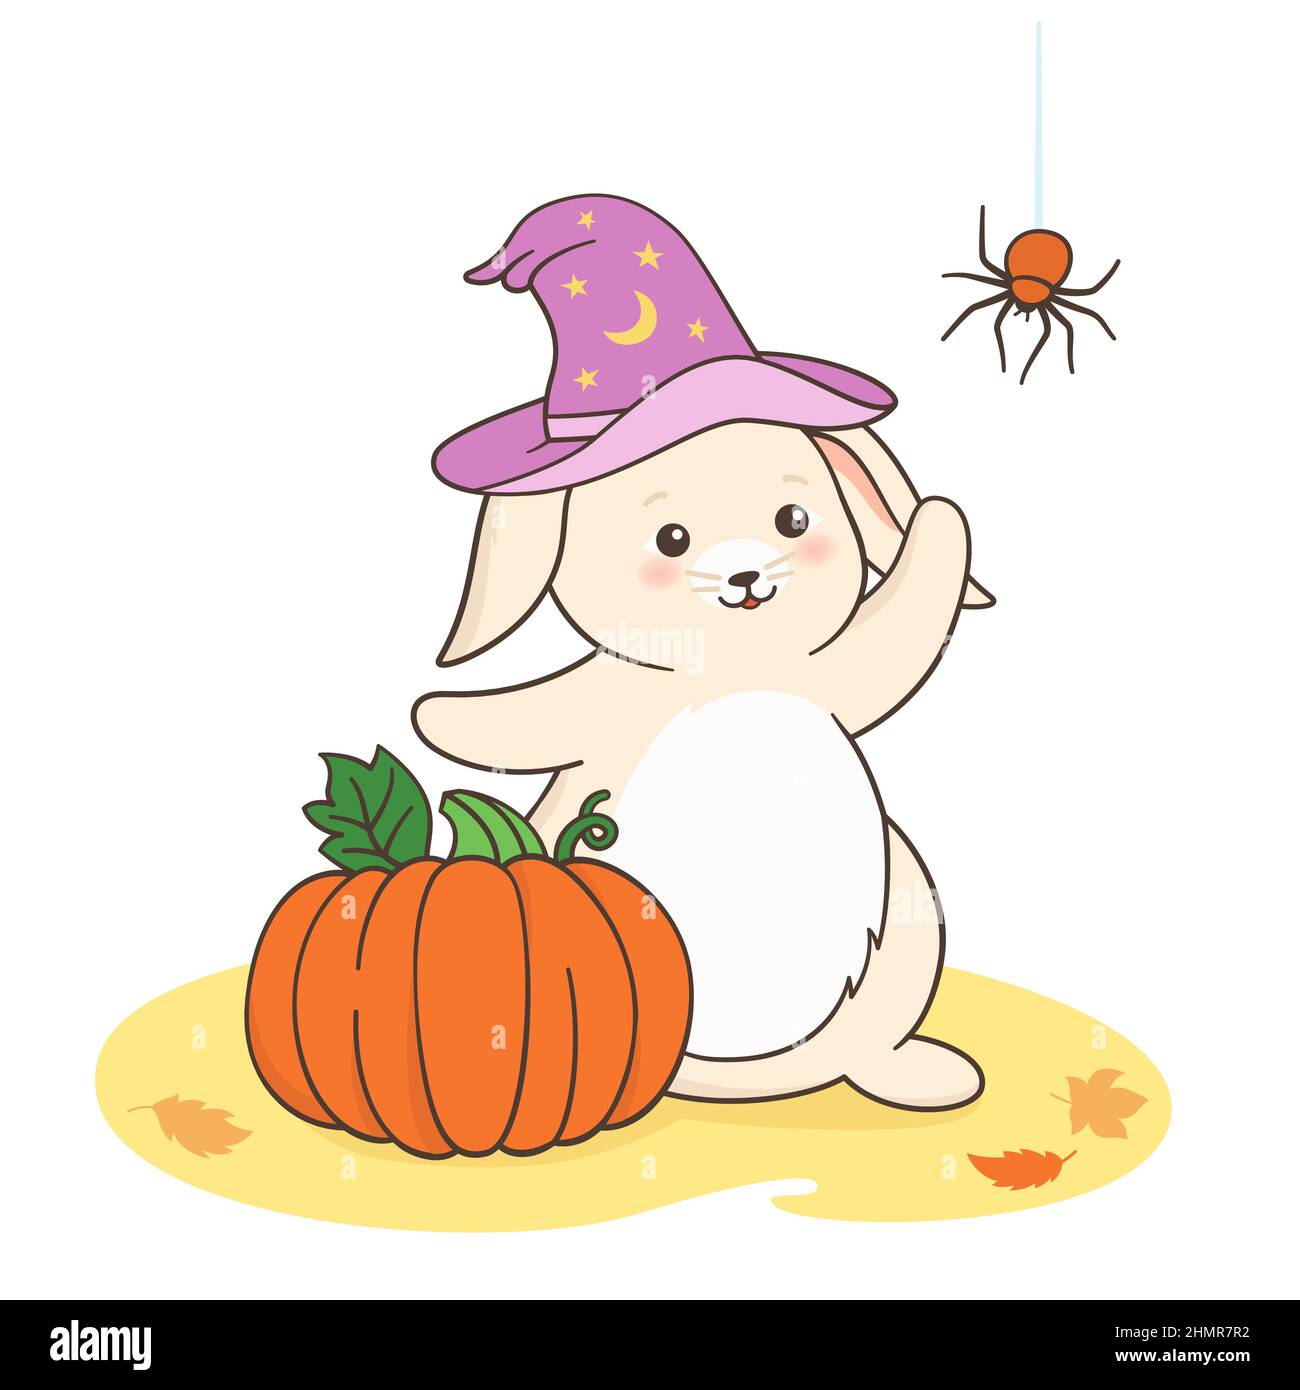 Halloween postcard, Rabbit with witch hat and pumpkin, cartoon spider poster. Bunny childish character, Happy Halloween festival concept. Hare mascot symbol year. Outline flat vector illustration Stock Vector